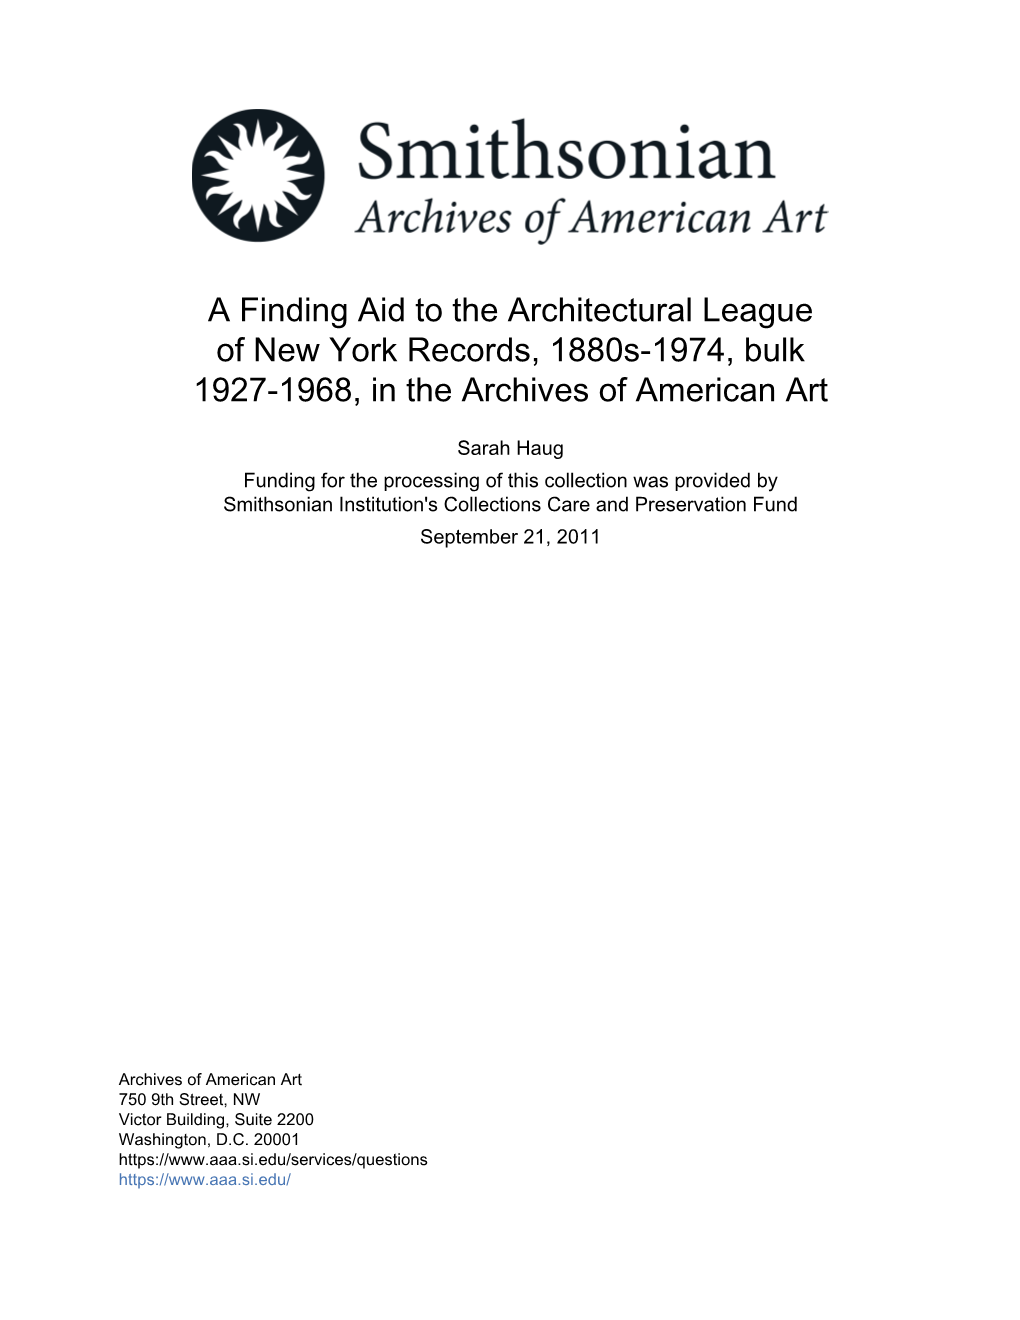 A Finding Aid to the Architectural League of New York Records, 1880S-1974, Bulk 1927-1968, in the Archives of American Art